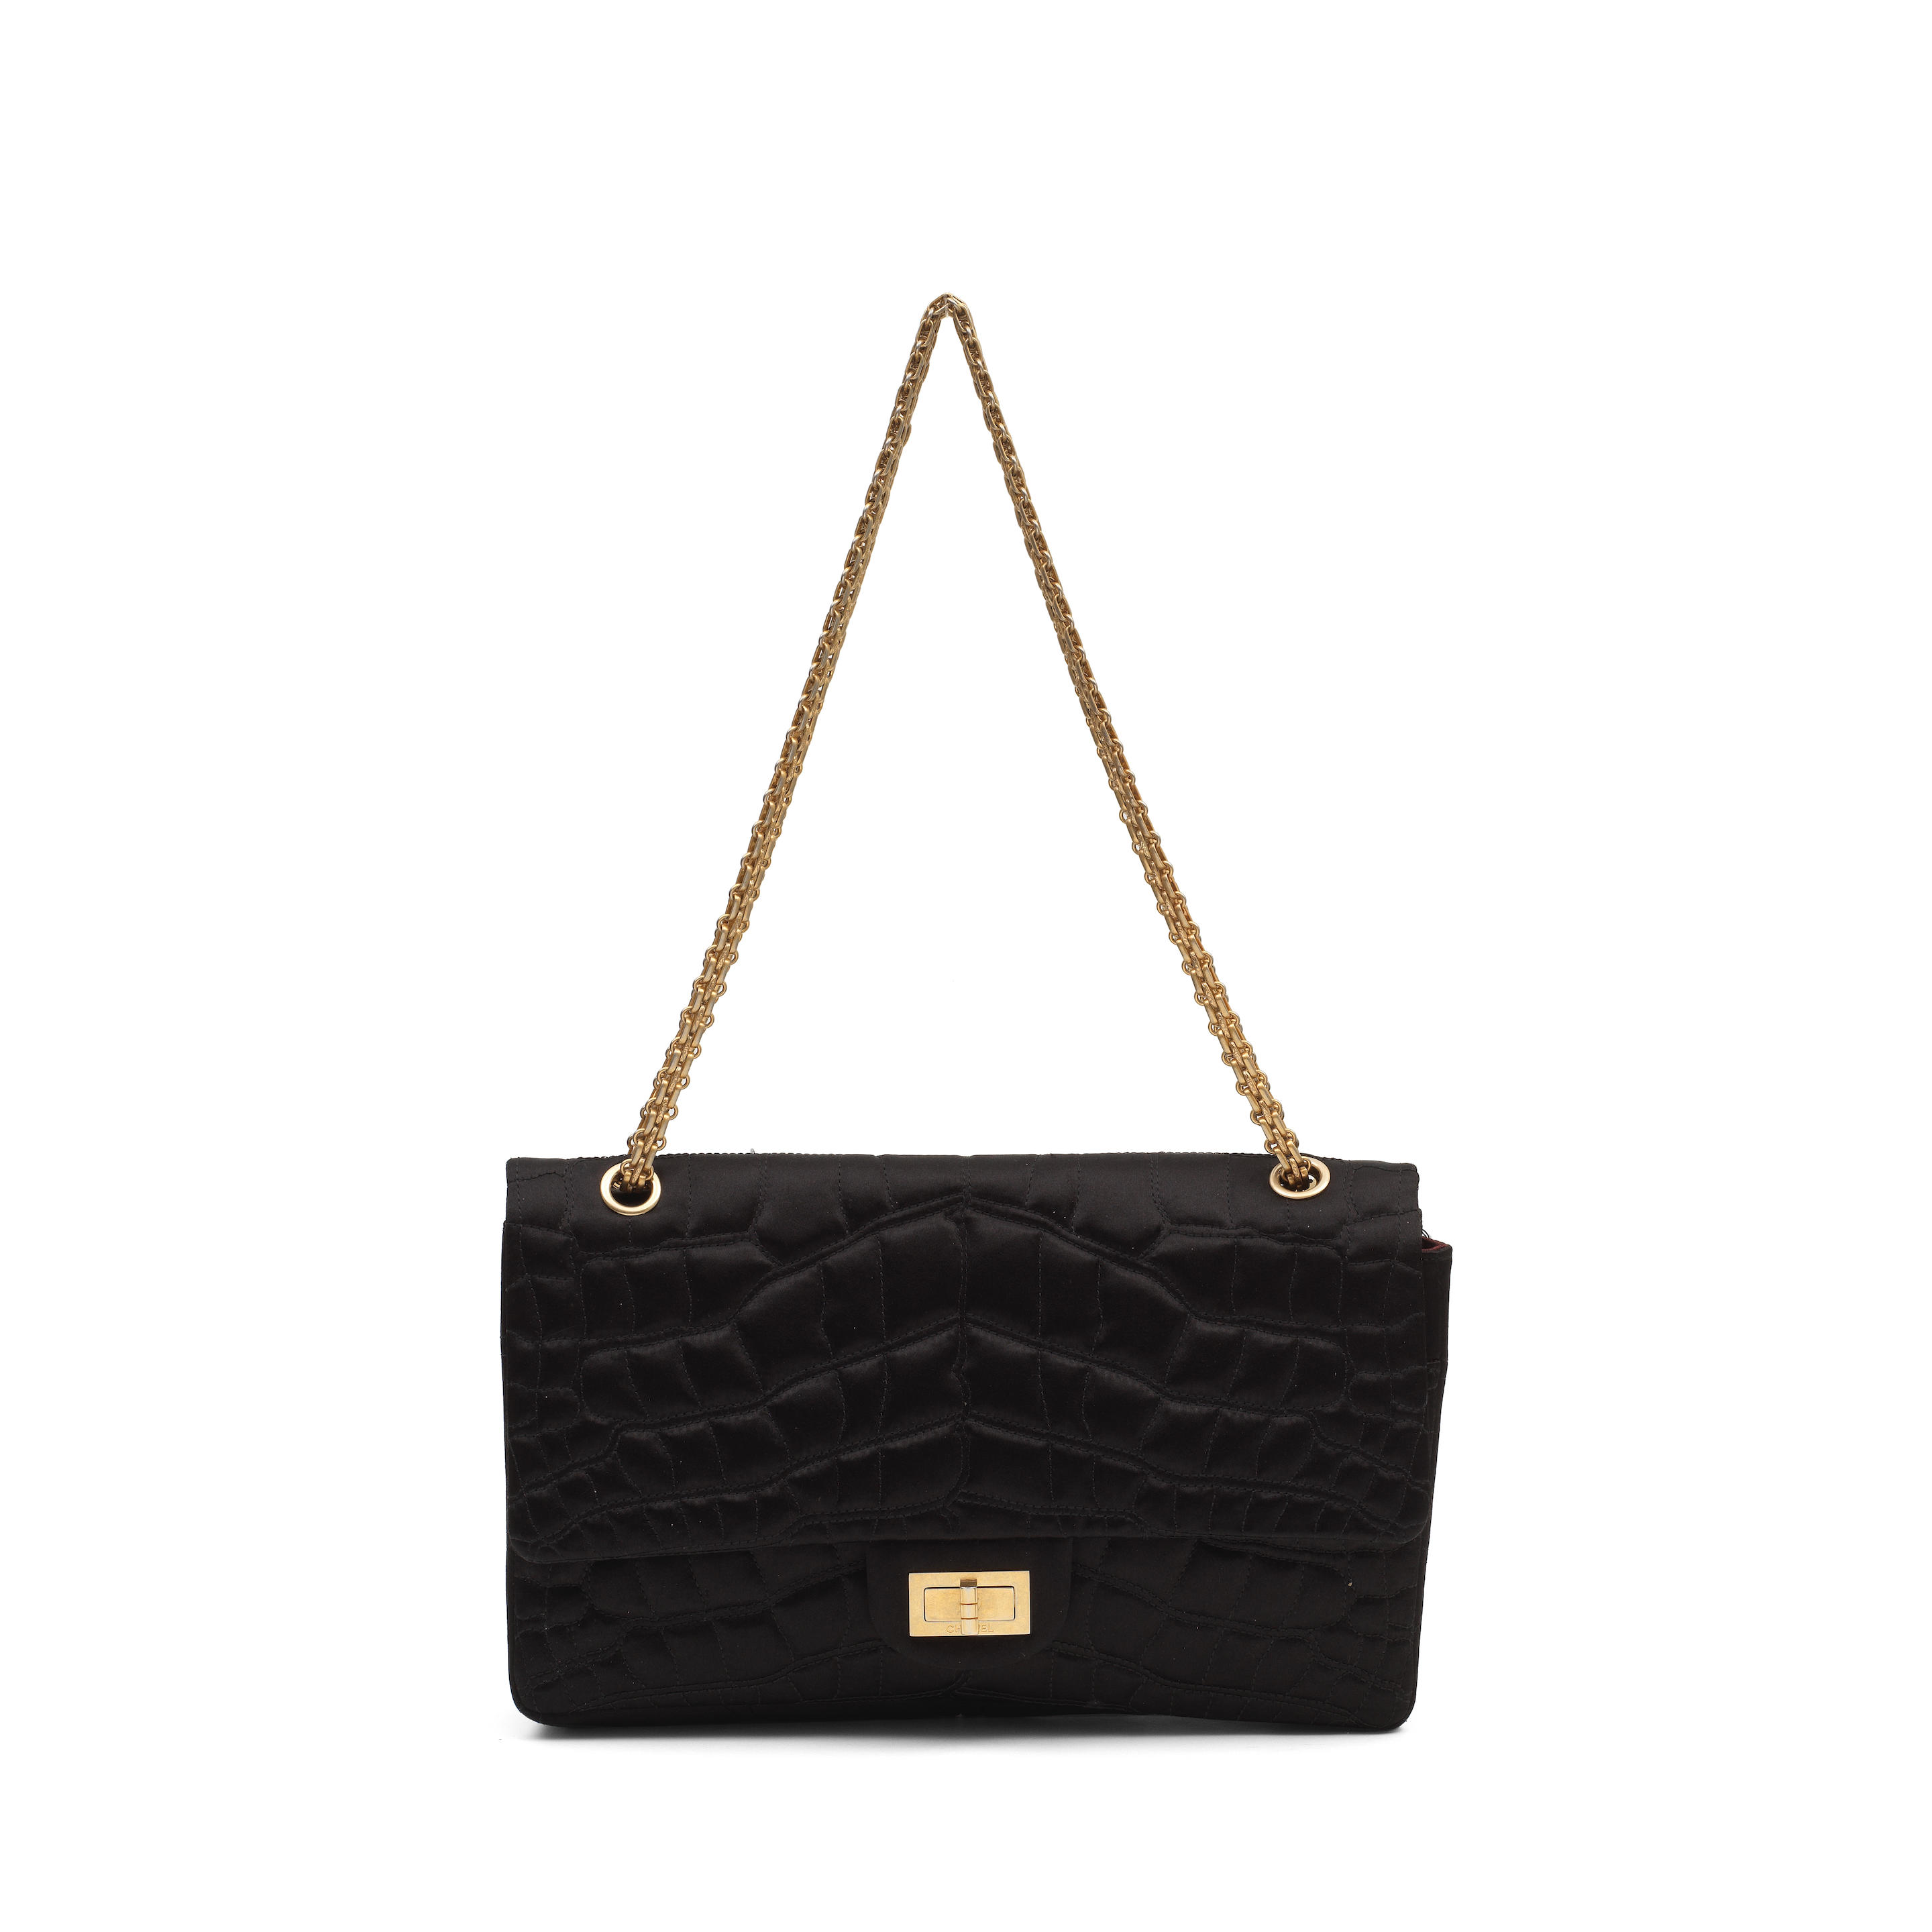 Want To Buy A Chanel Or Hermes Bag At Auction? Bonham's Have A